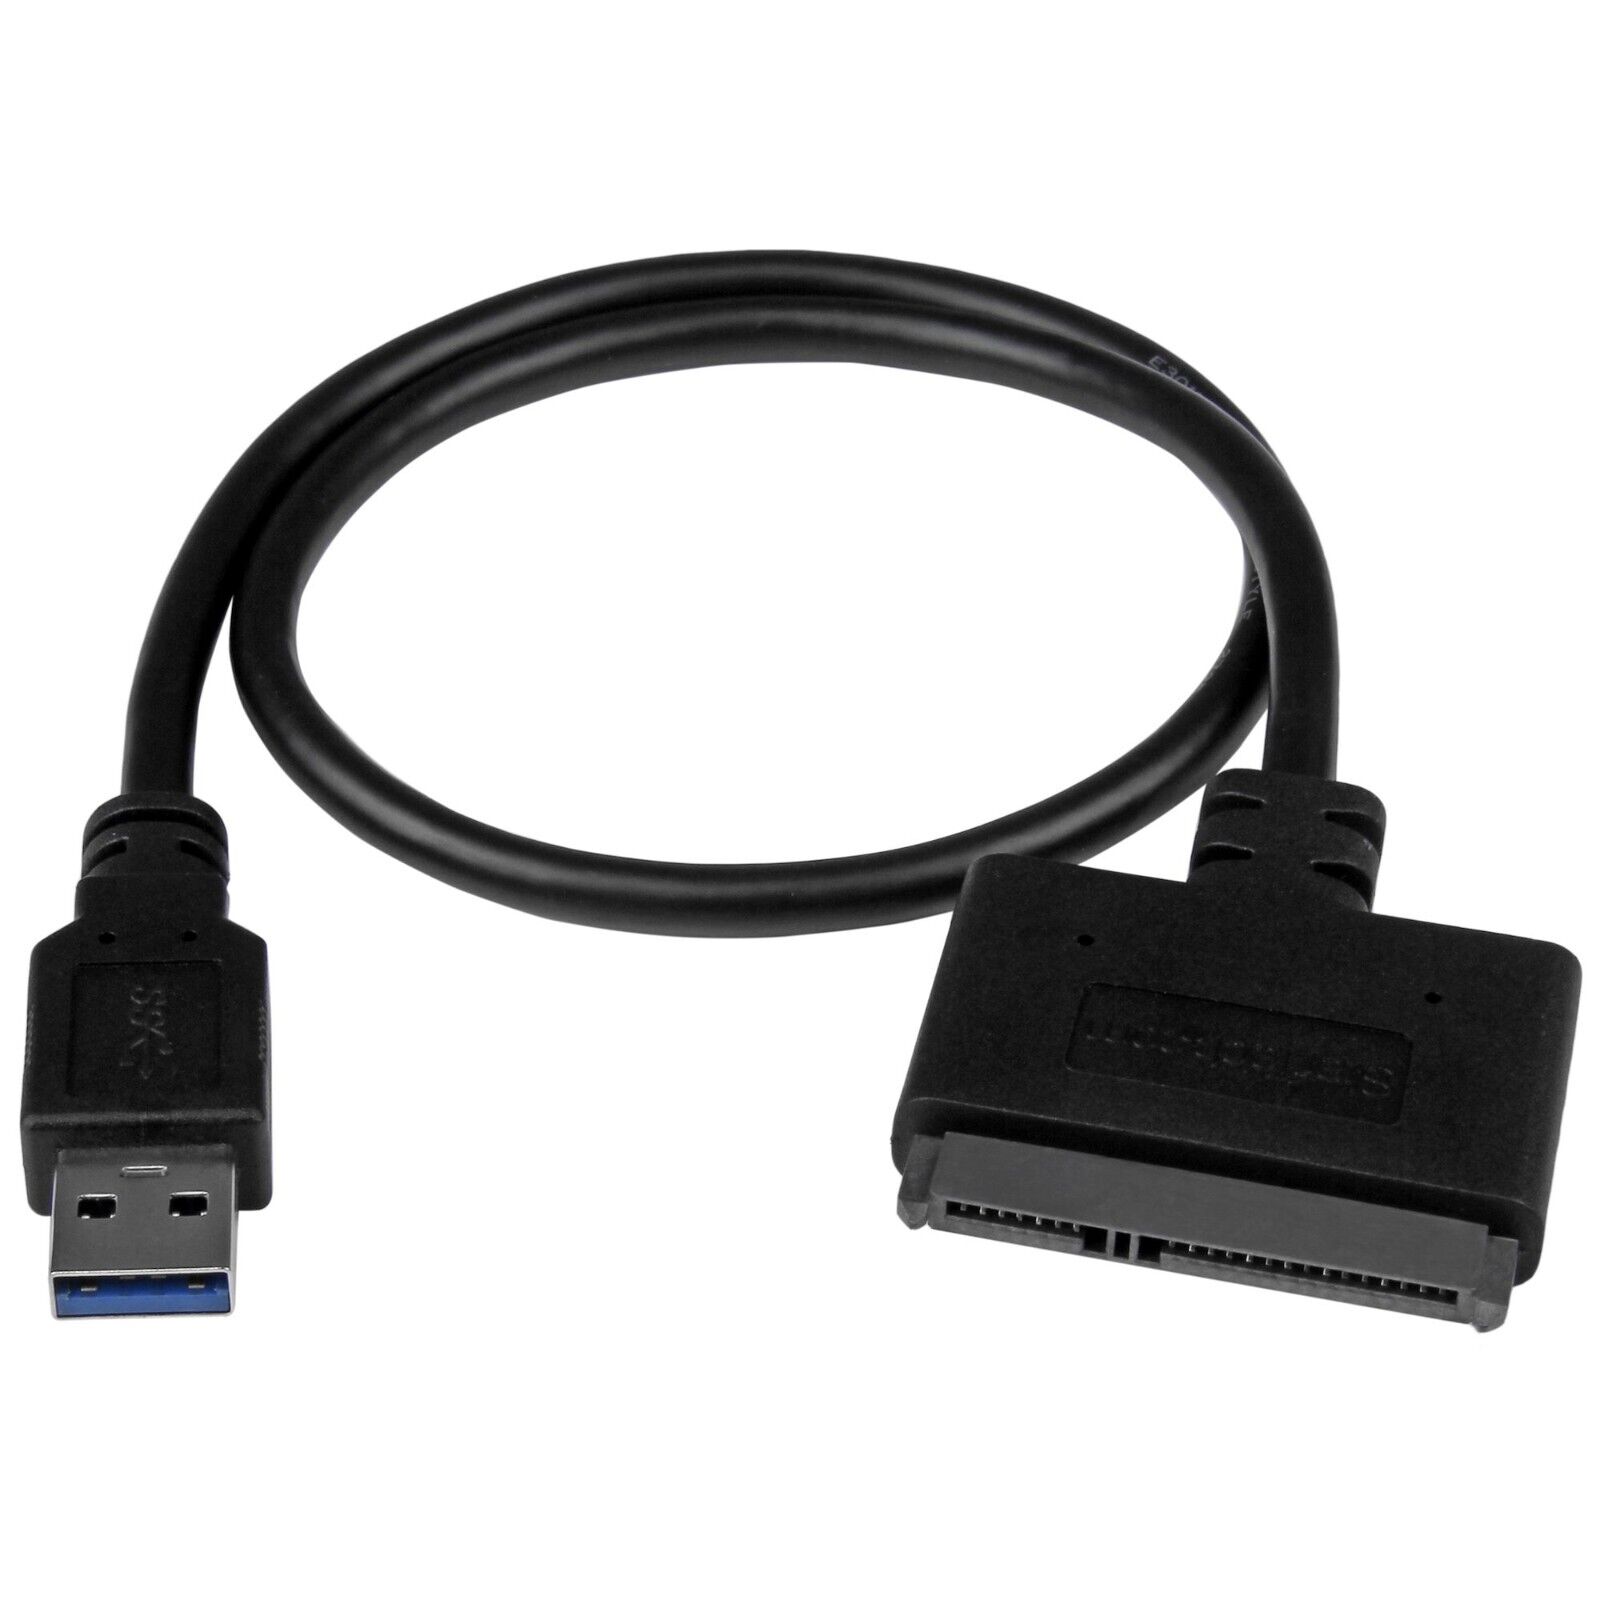 StarTech USB312SAT3CB USB 3.1 (10Gbps) Adapter Cable for 2.5